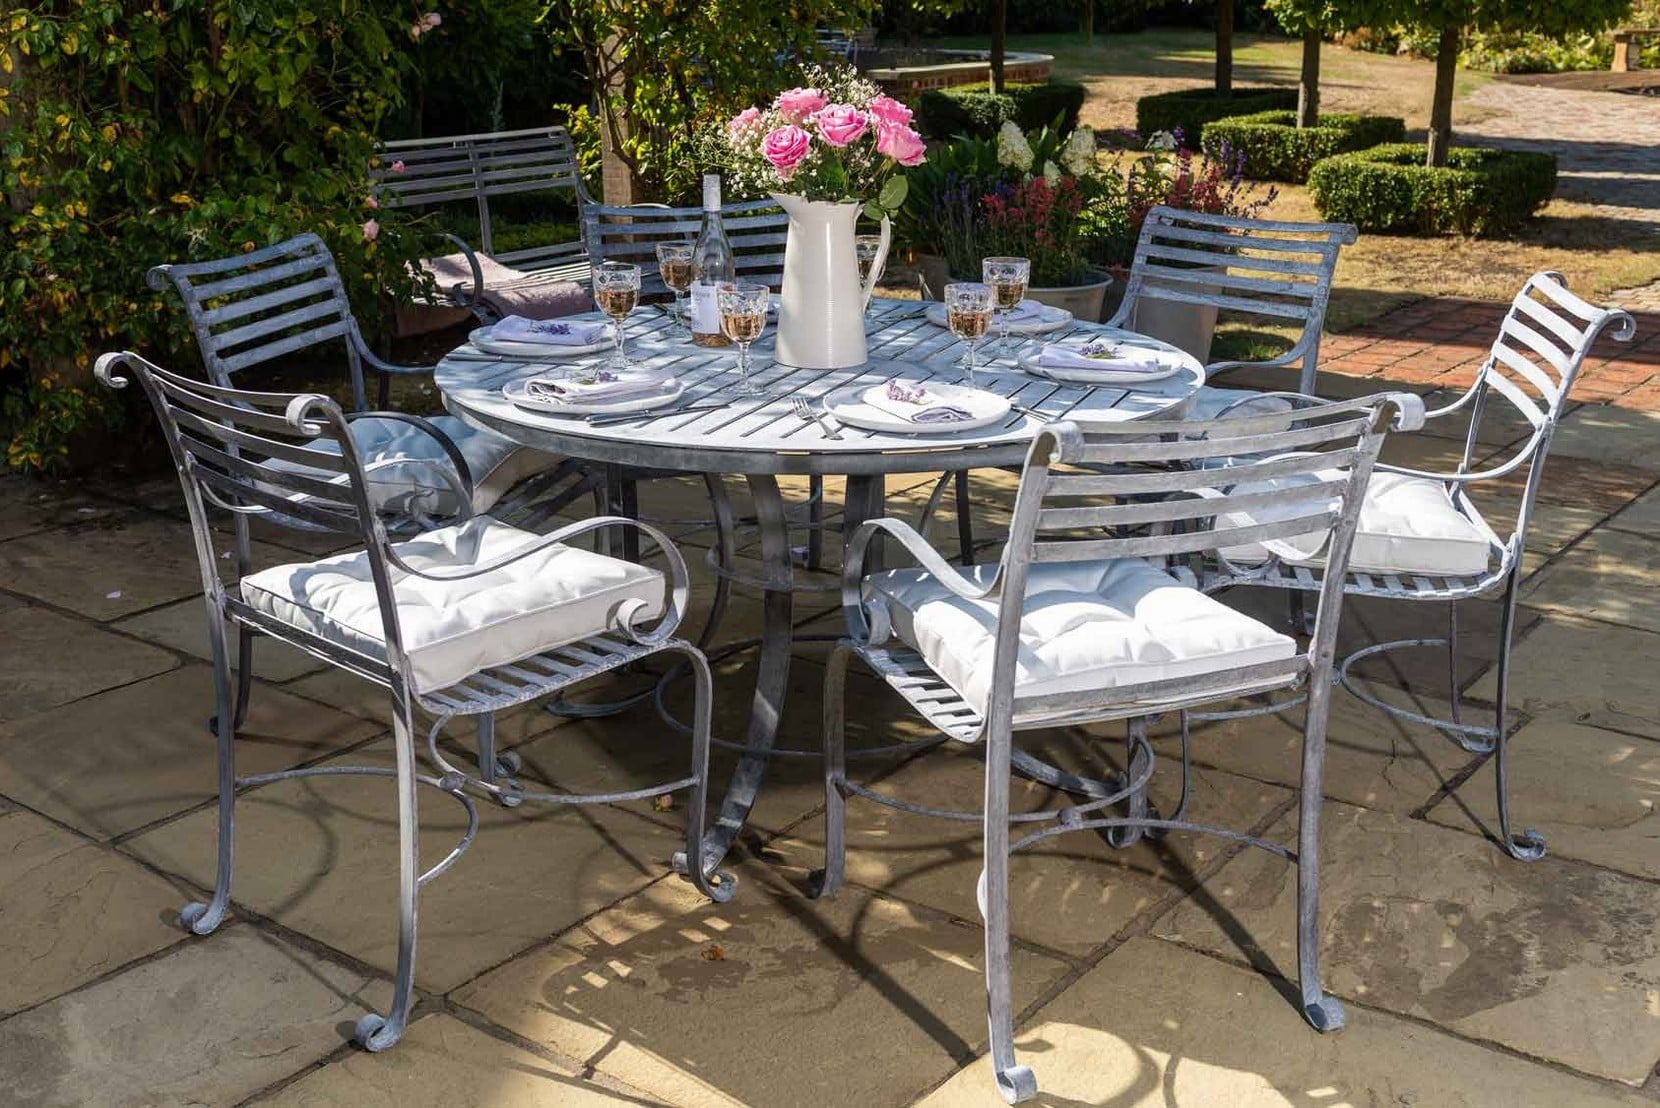 southwold-1-3m-round-dining-table-sets-9-2021922149.jpg